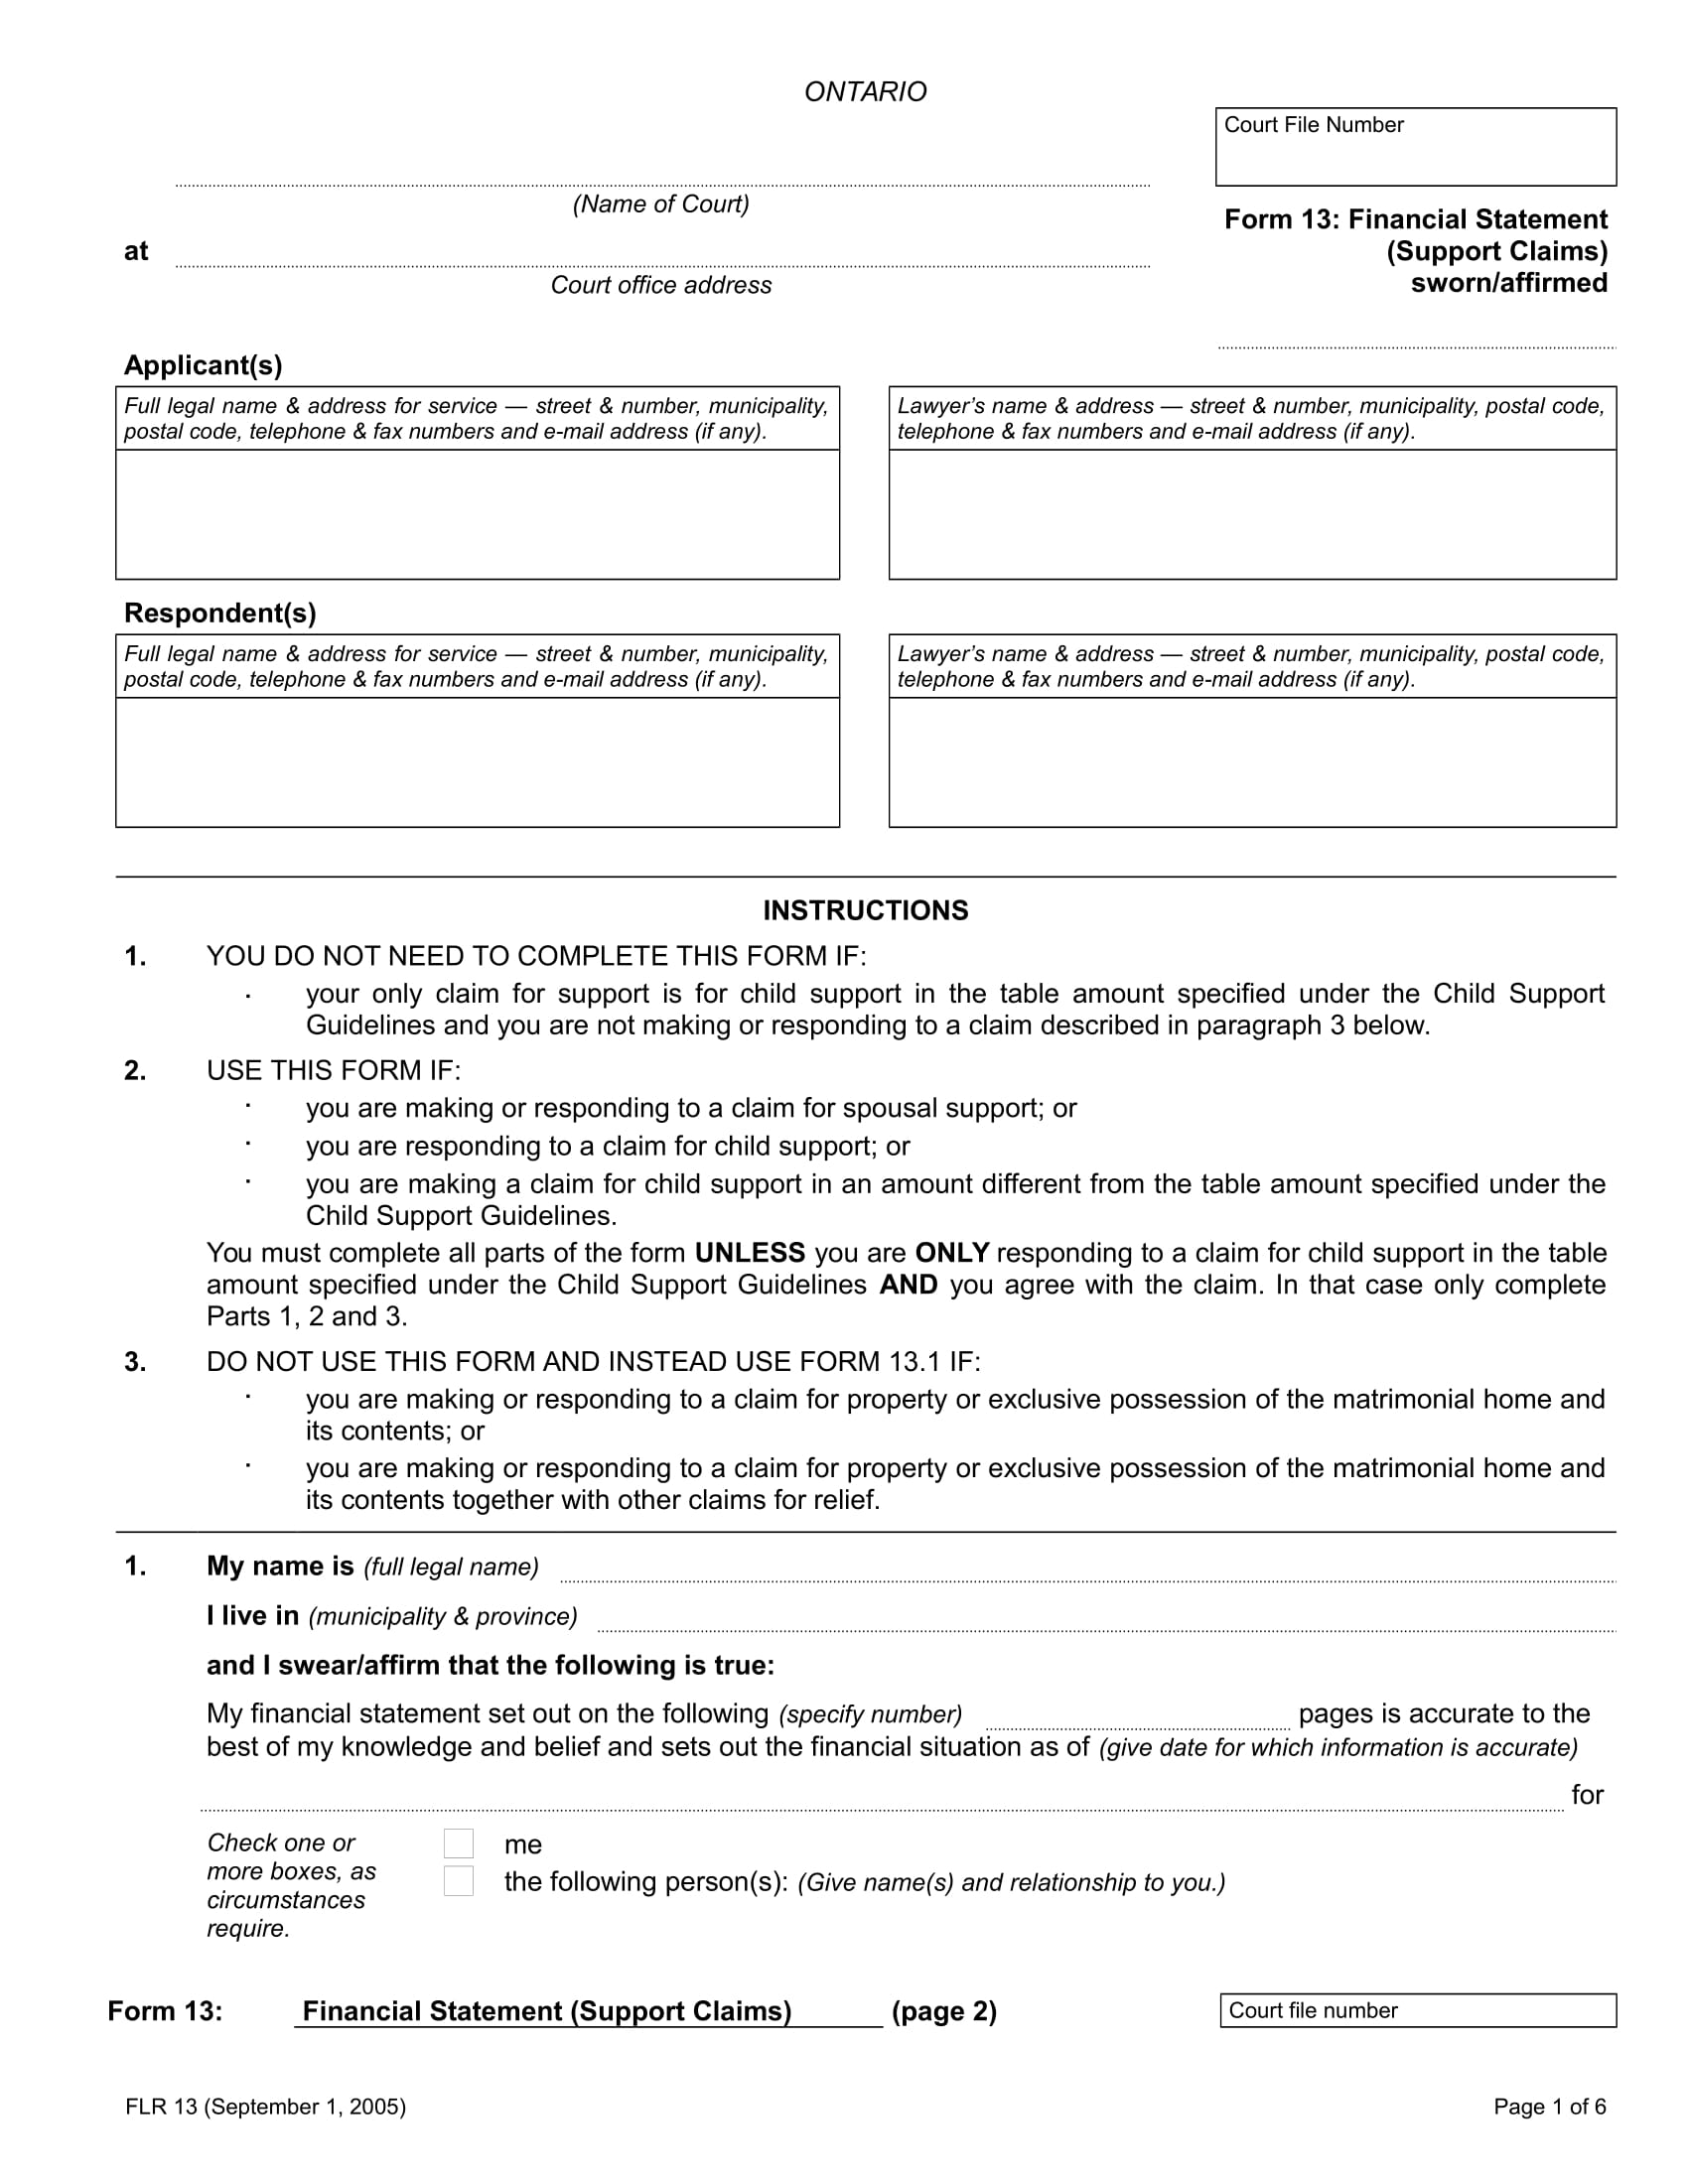 support claims financial statement form 1